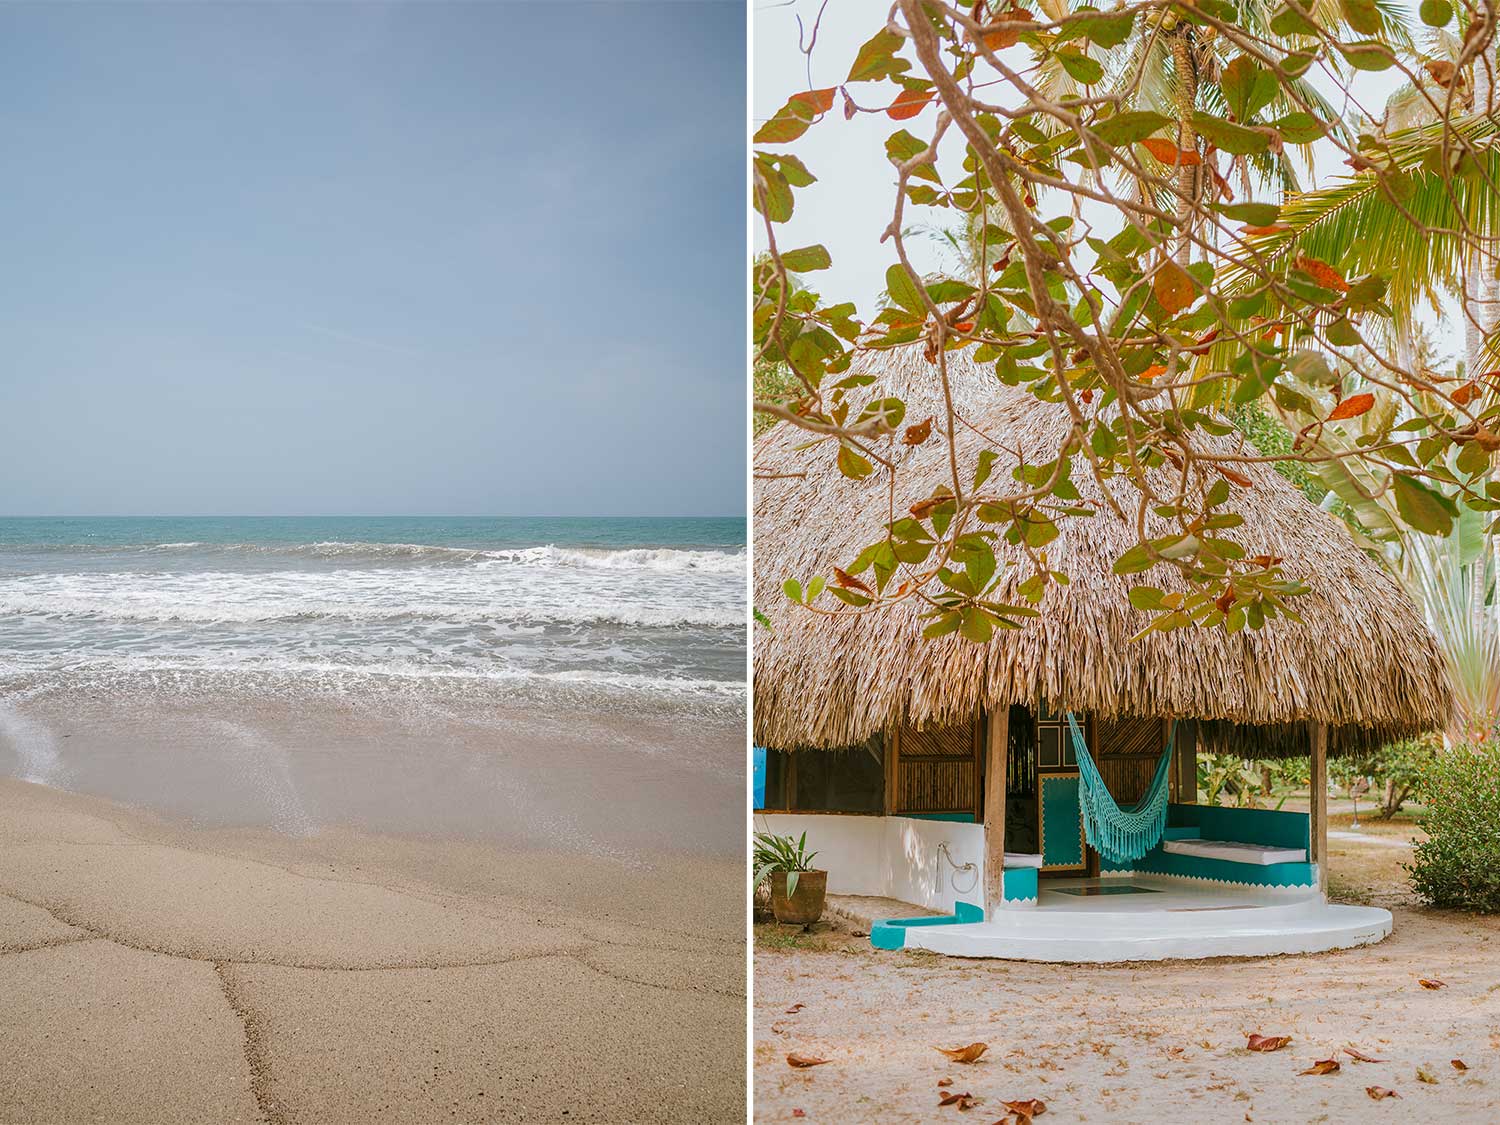 A side by side image of a beach shoreline and a private bungalo at Koralia beach.